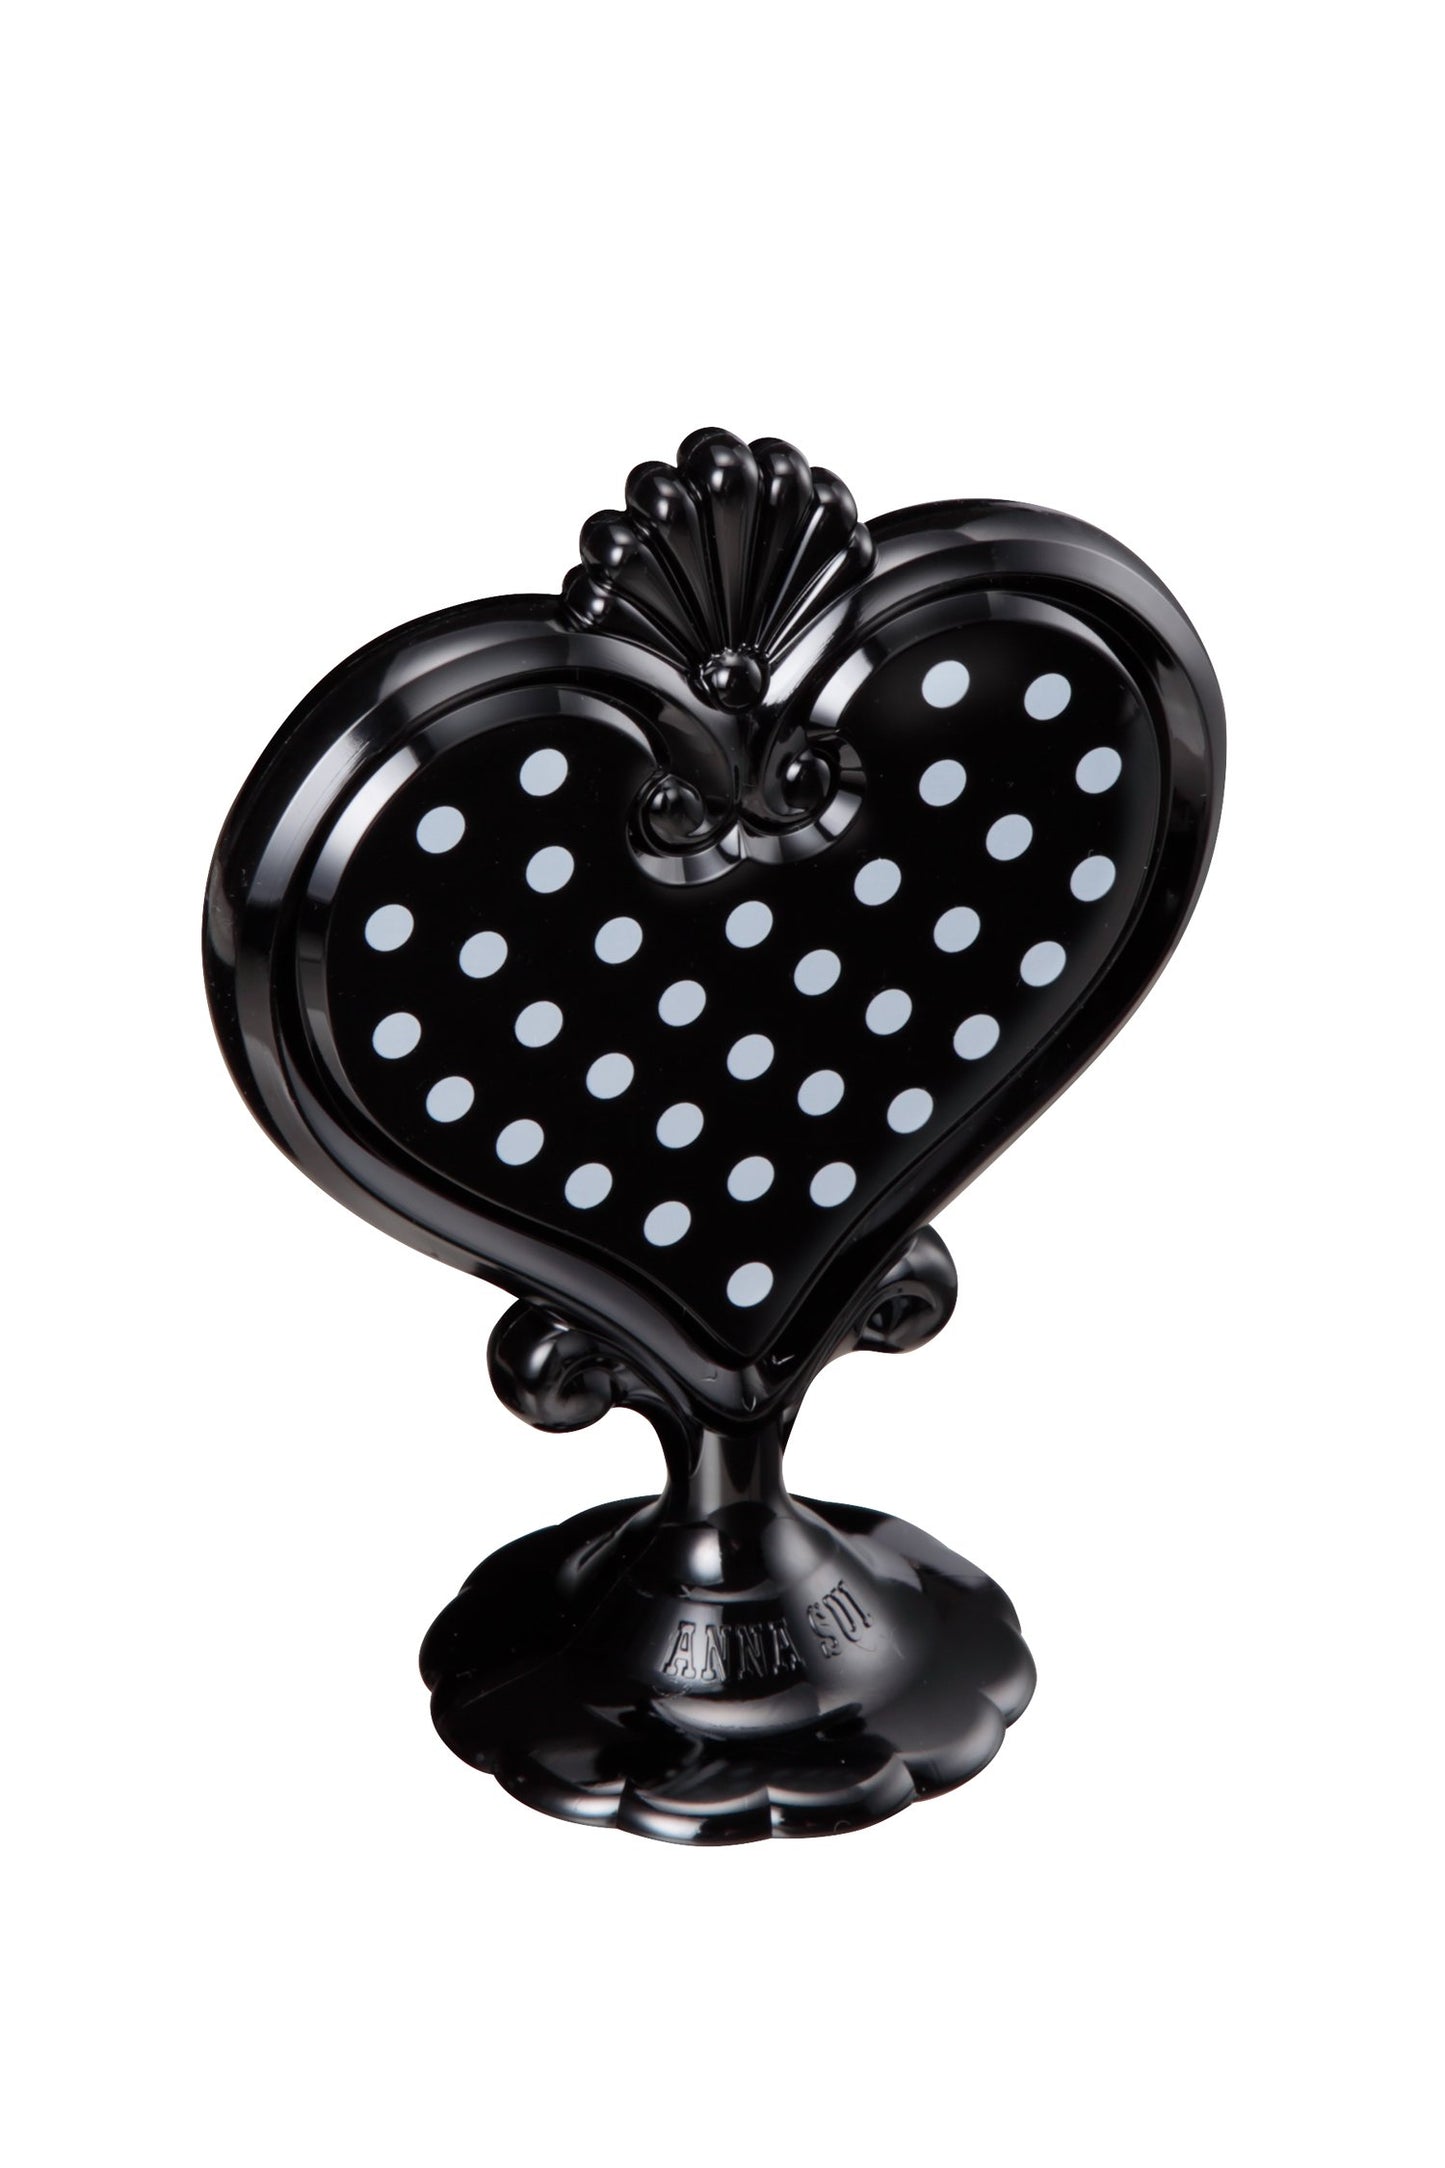 Black Stand Mirror in a heart-shaped with white dots in it on one side, stand with Anna label